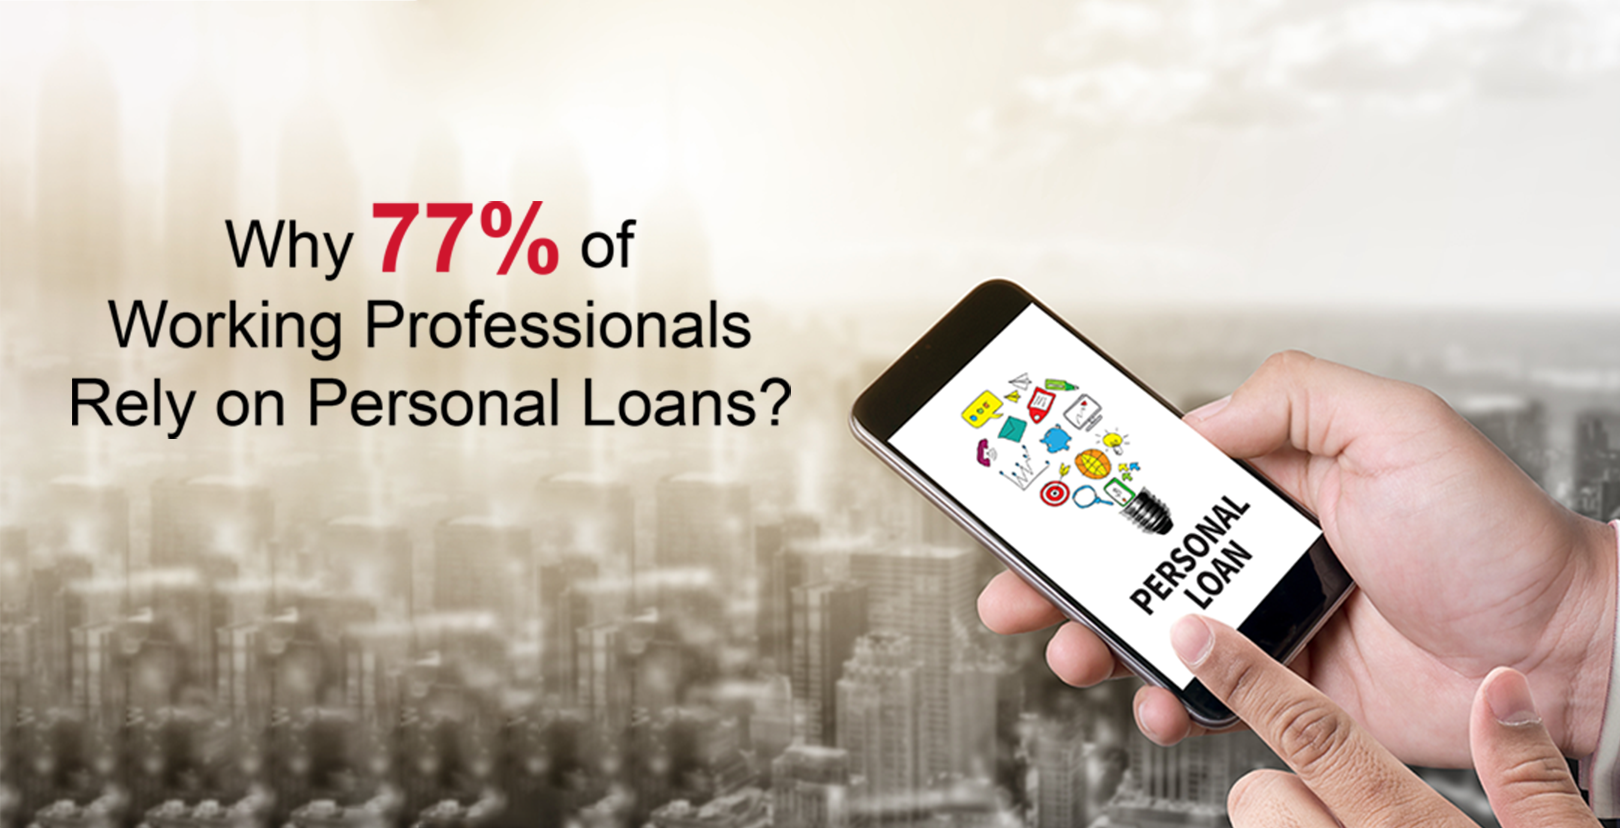 Why 77% of Working Professionals Rely on Personal Loans?